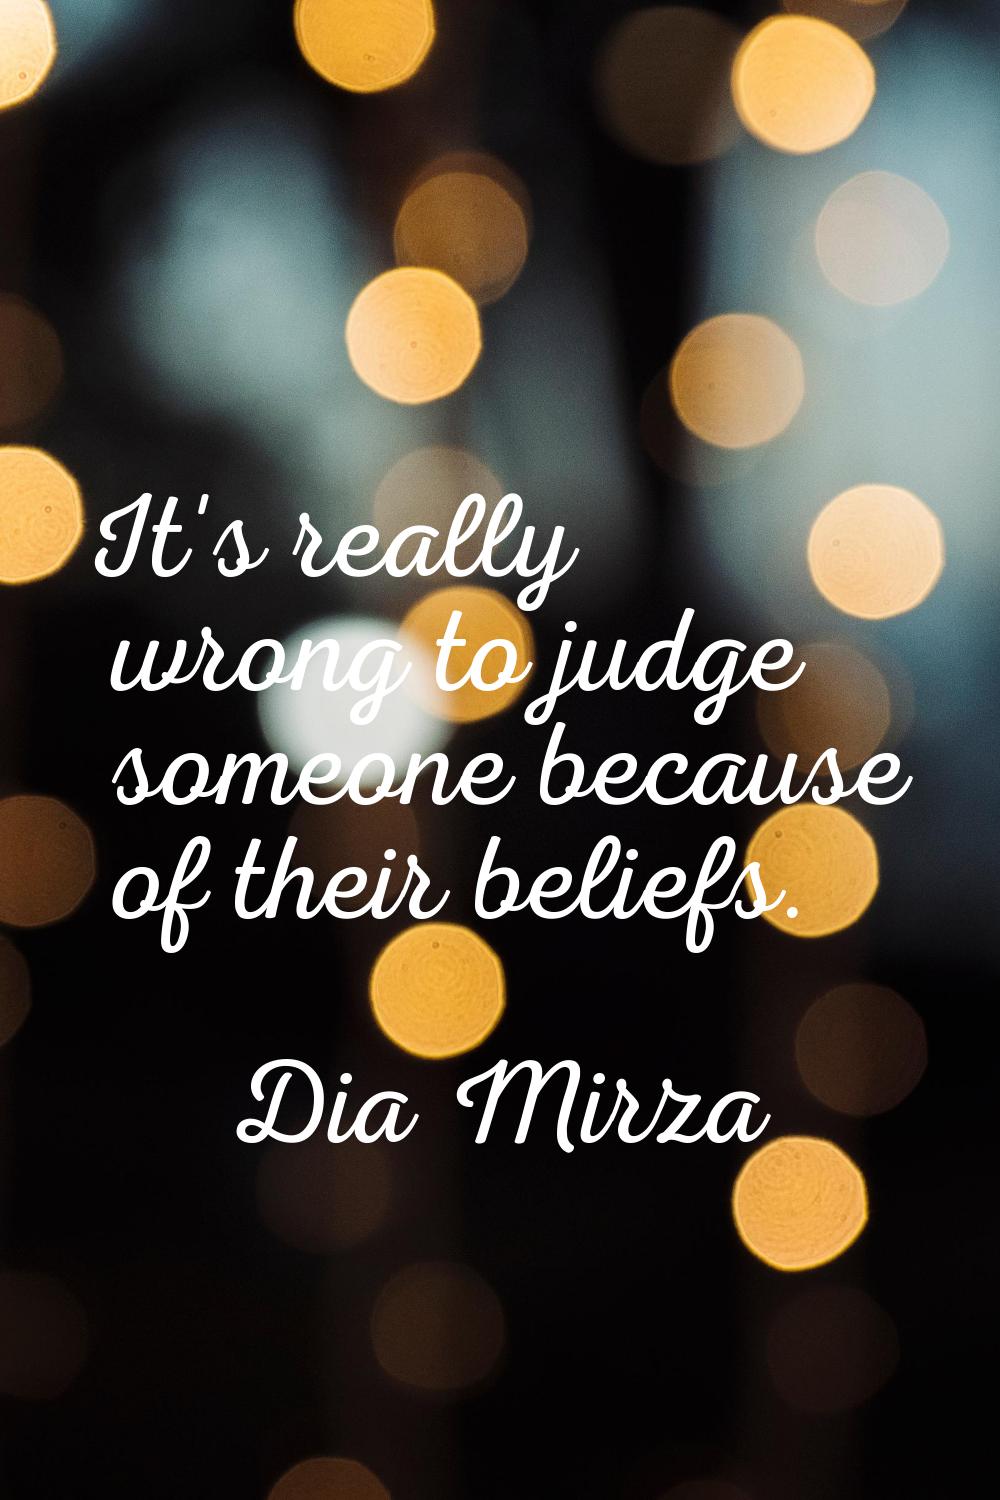 It's really wrong to judge someone because of their beliefs.